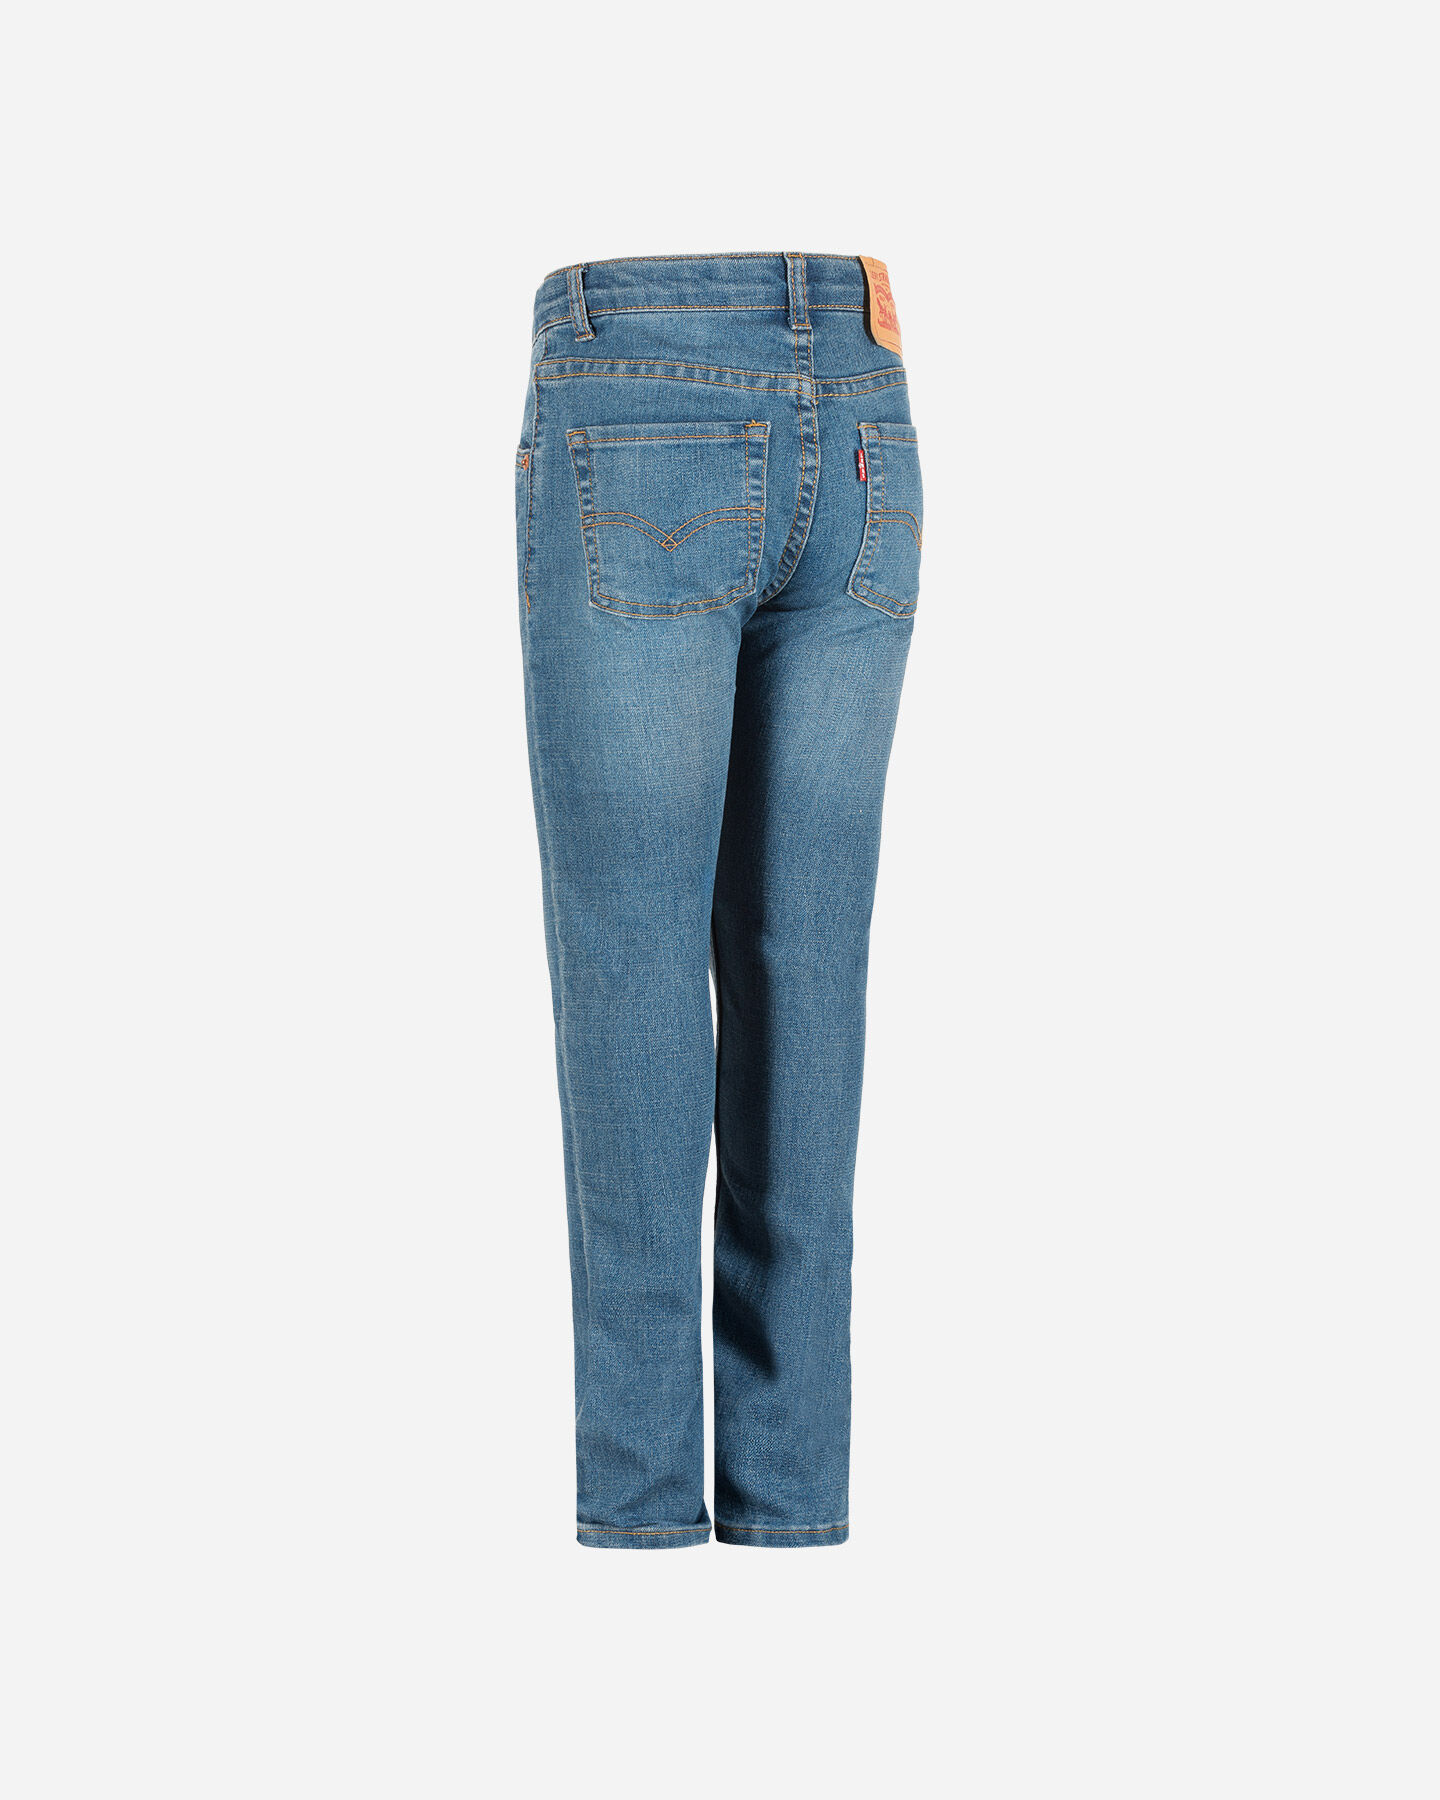  Jeans LEVI'S 510 SKINNY JR S4076432|MA5|6A scatto 1